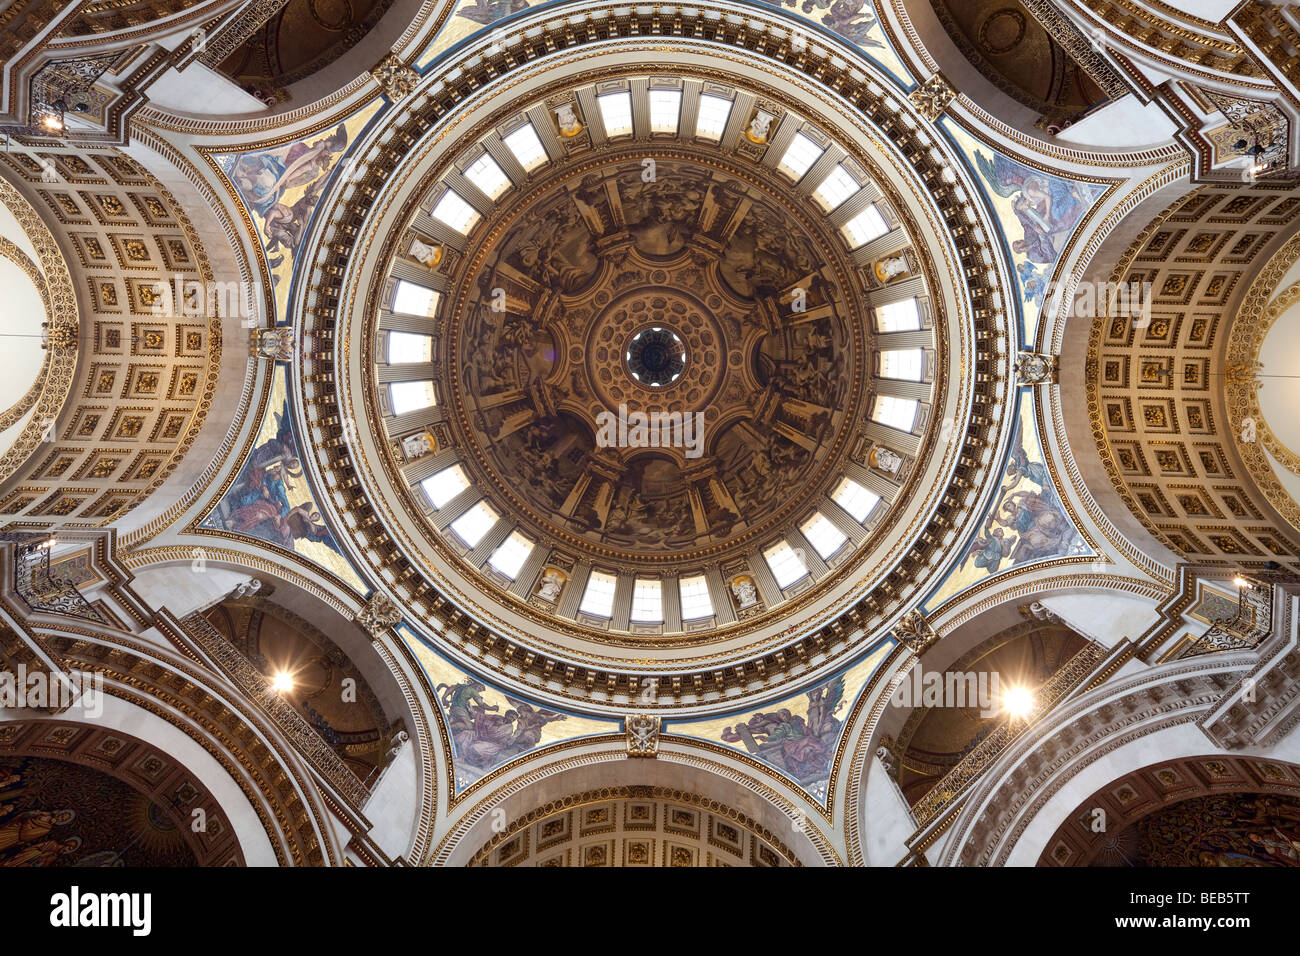 interior of main dome, St. Paul's cathedral, London, England, UK Stock Photo